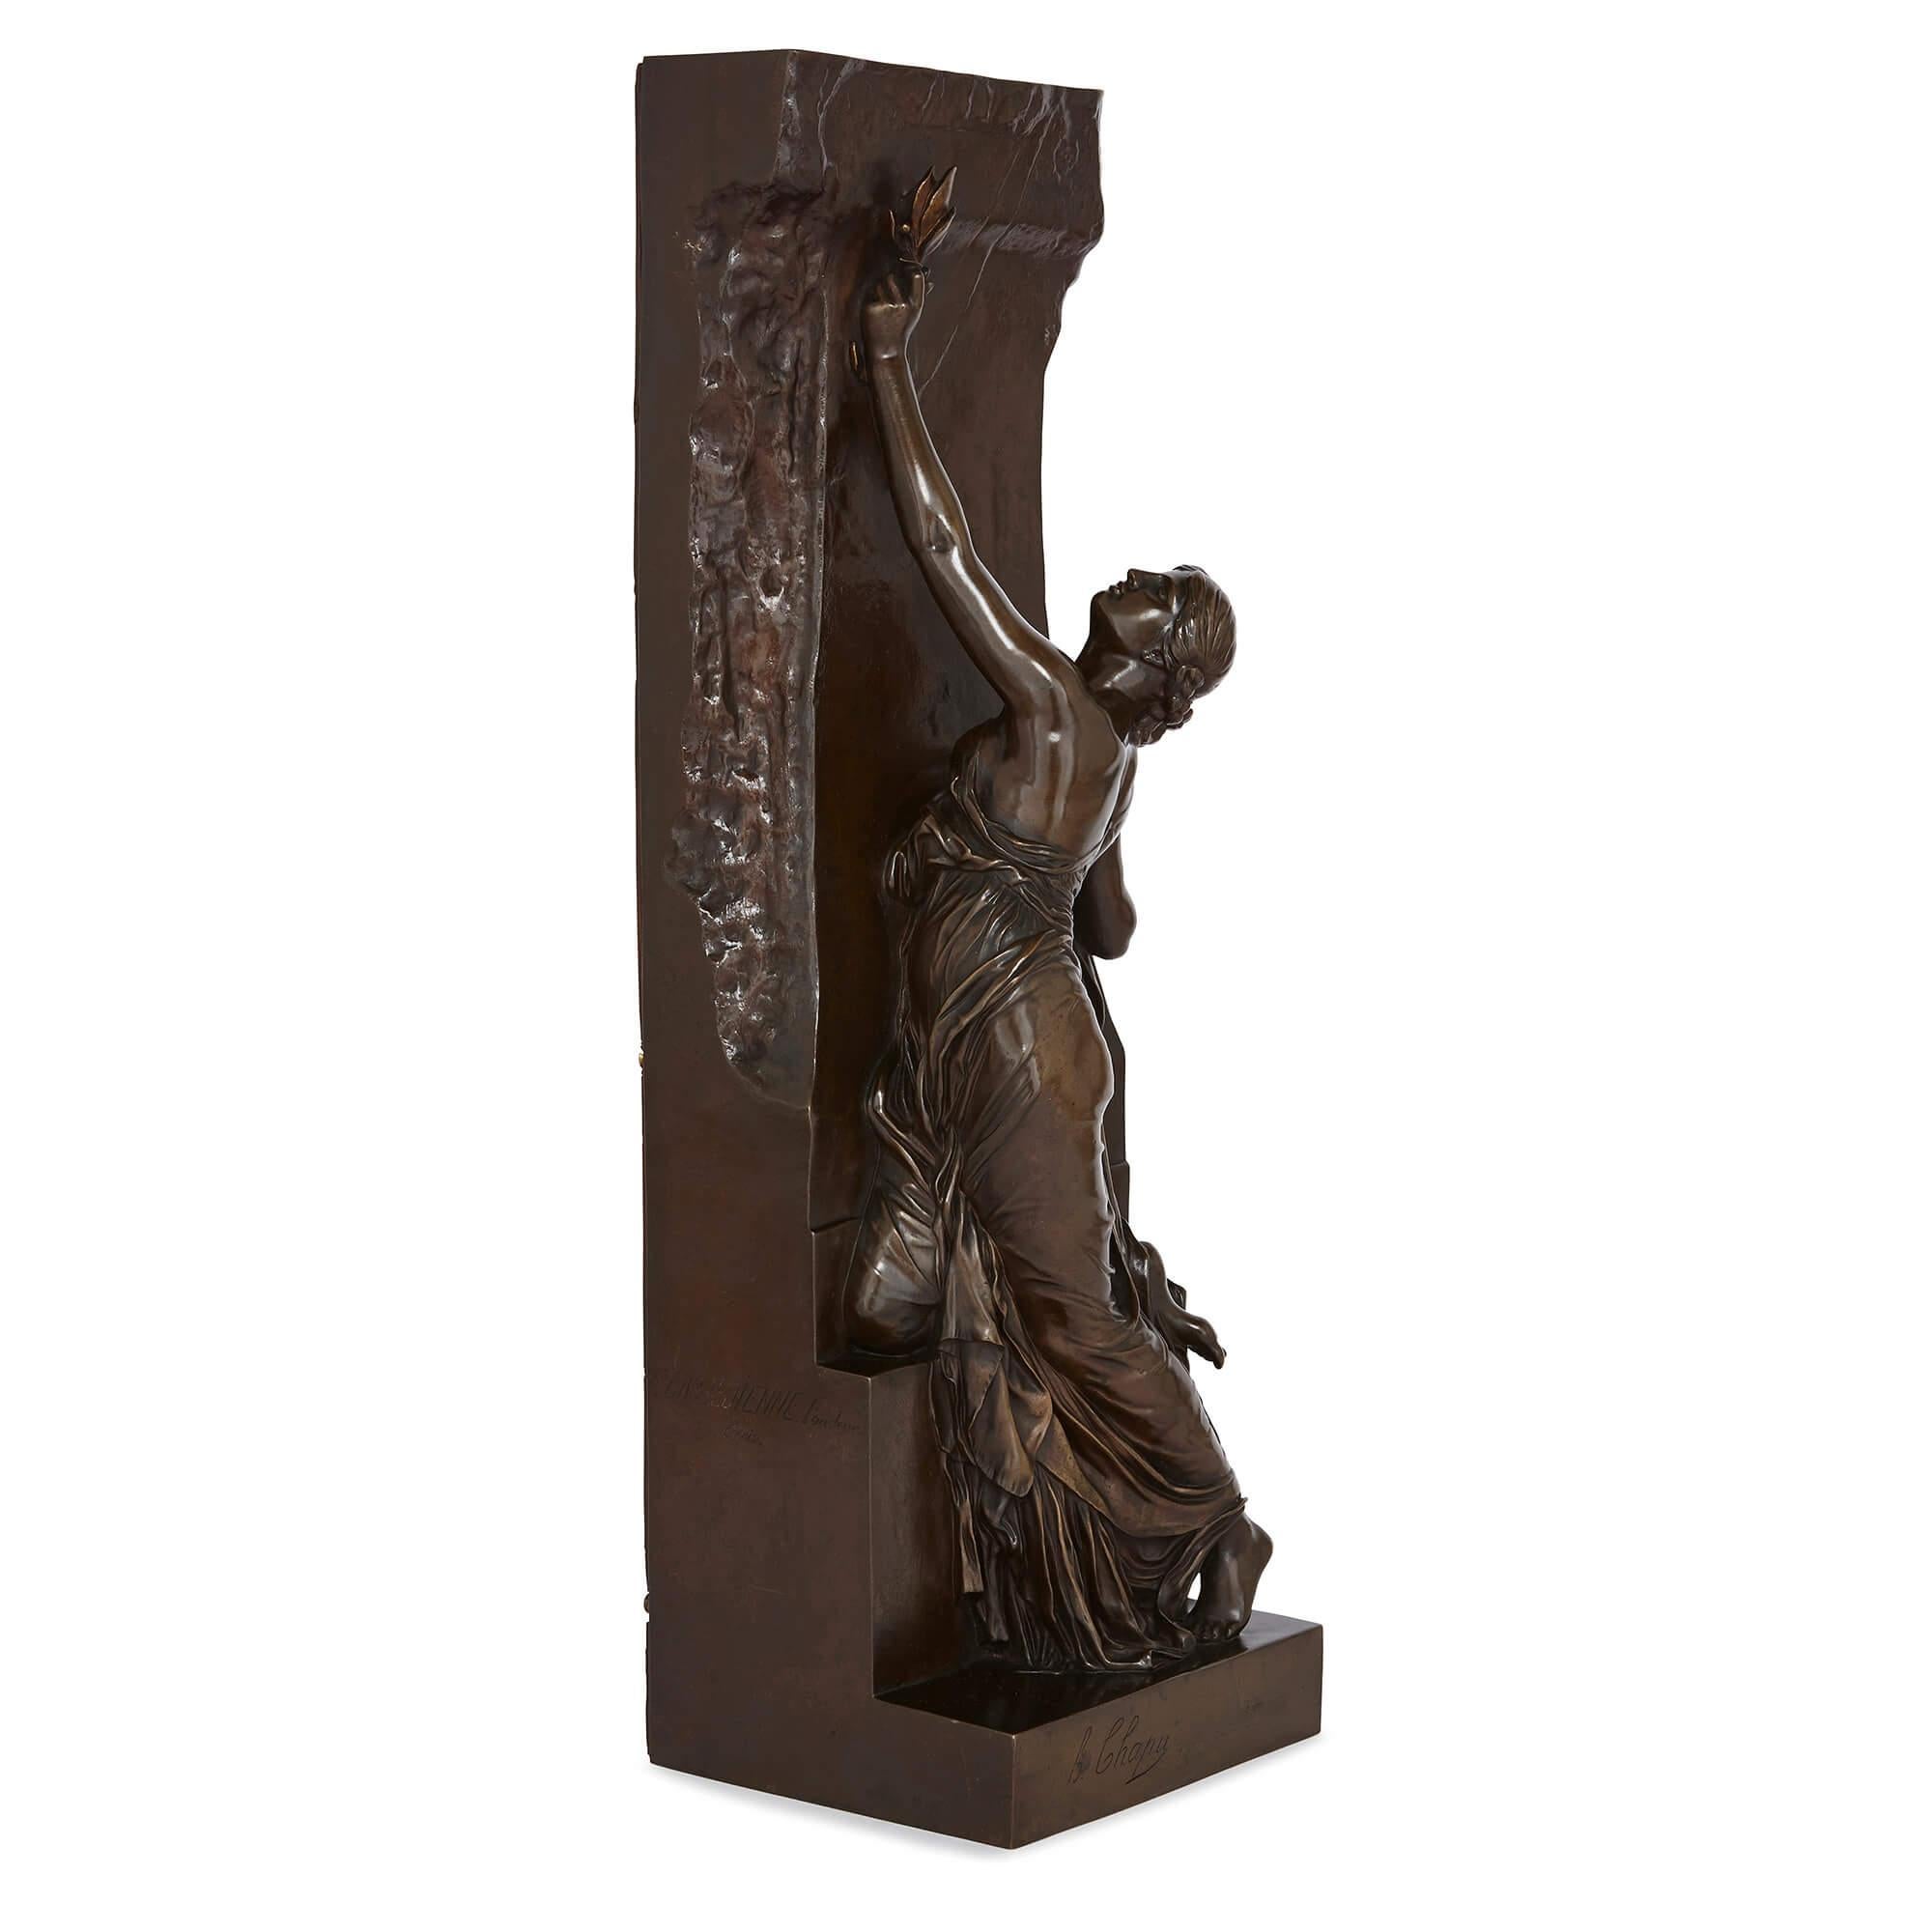 'La Jeunesse' 19th Century bronze sculpture by Chapu and Barbedienne 